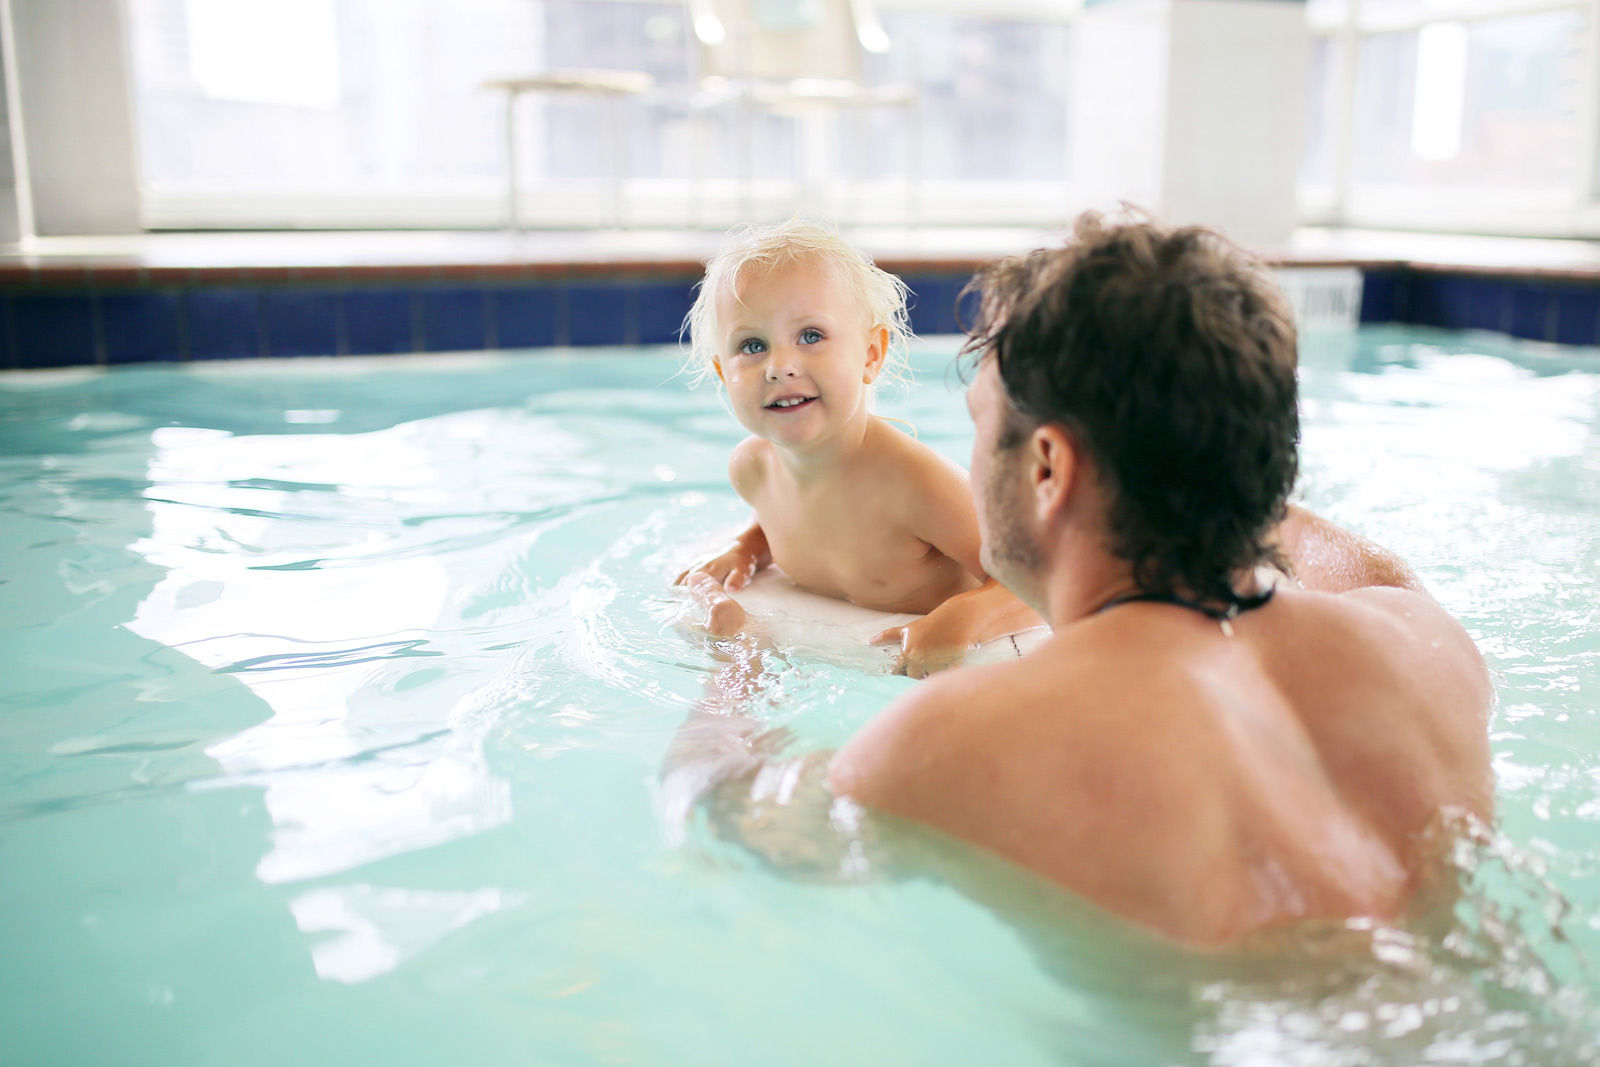 Don't forget to pack special diapers for your little swimmer when staying at our Medicine Hat hotel with a pool